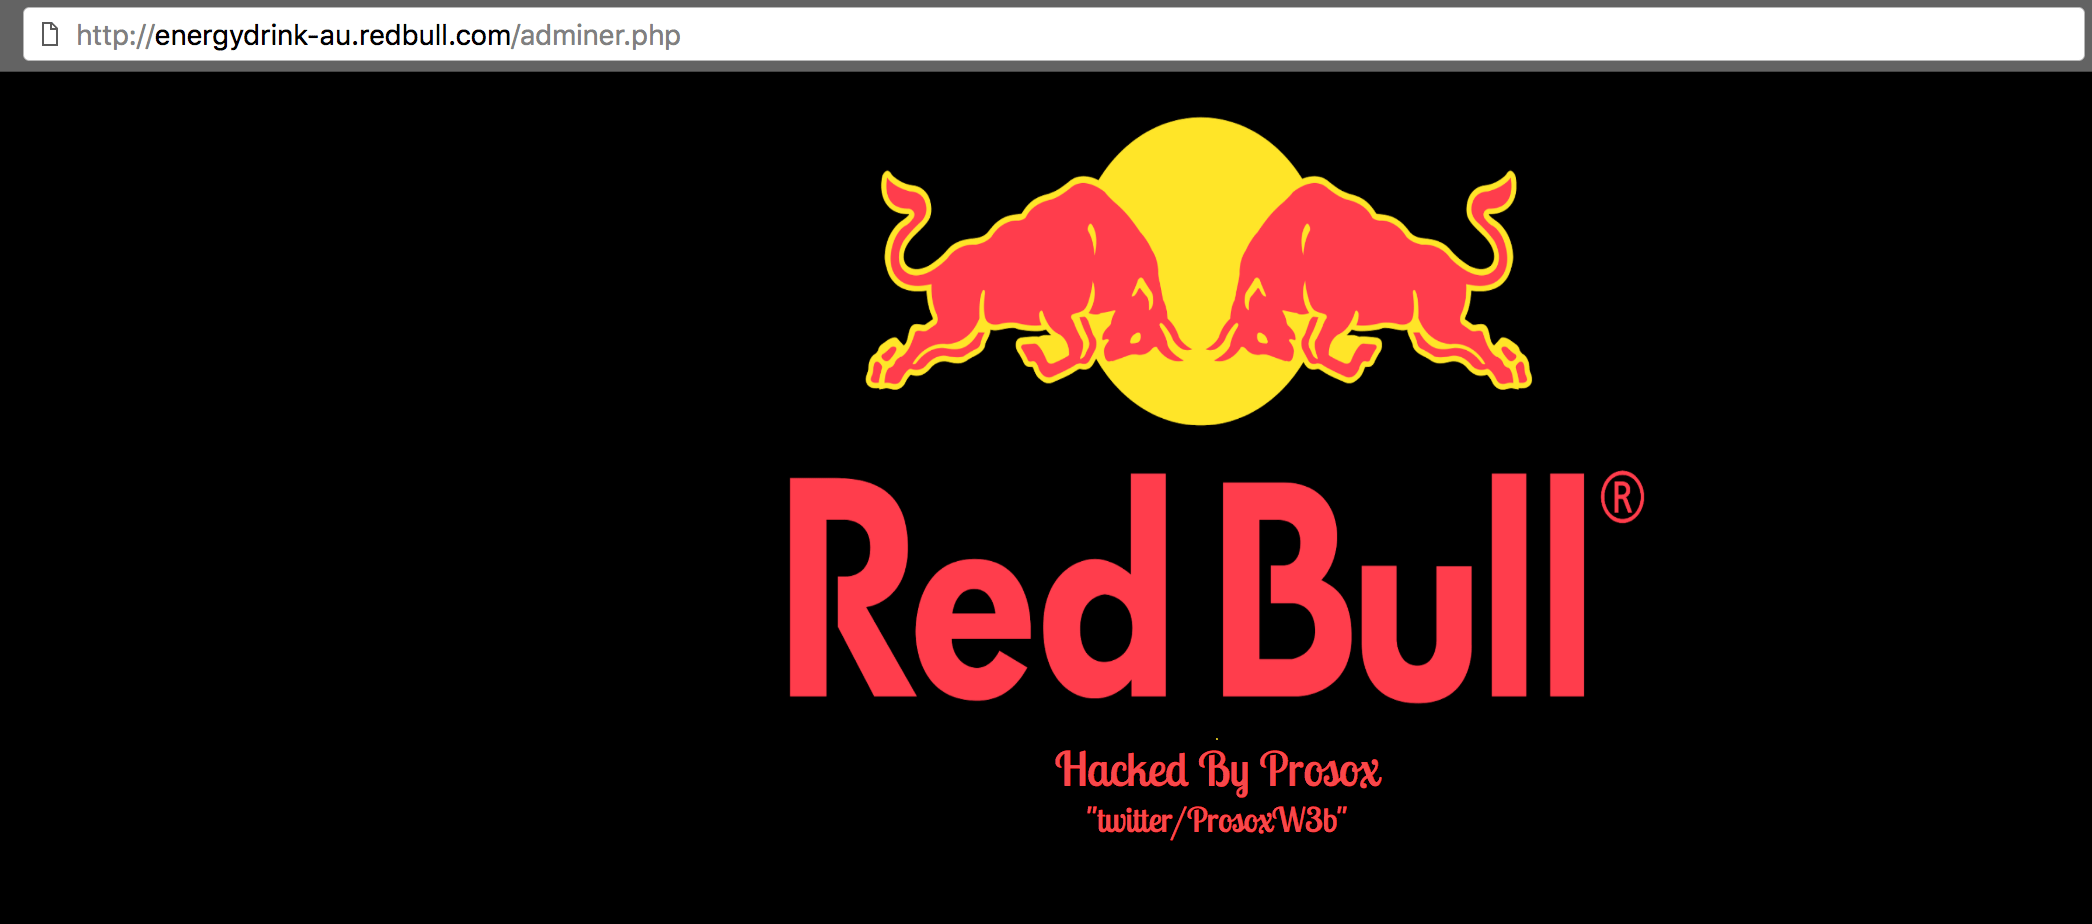 A screenshot of Red Bull website being hacked and defaced by the hacker named Prosox.